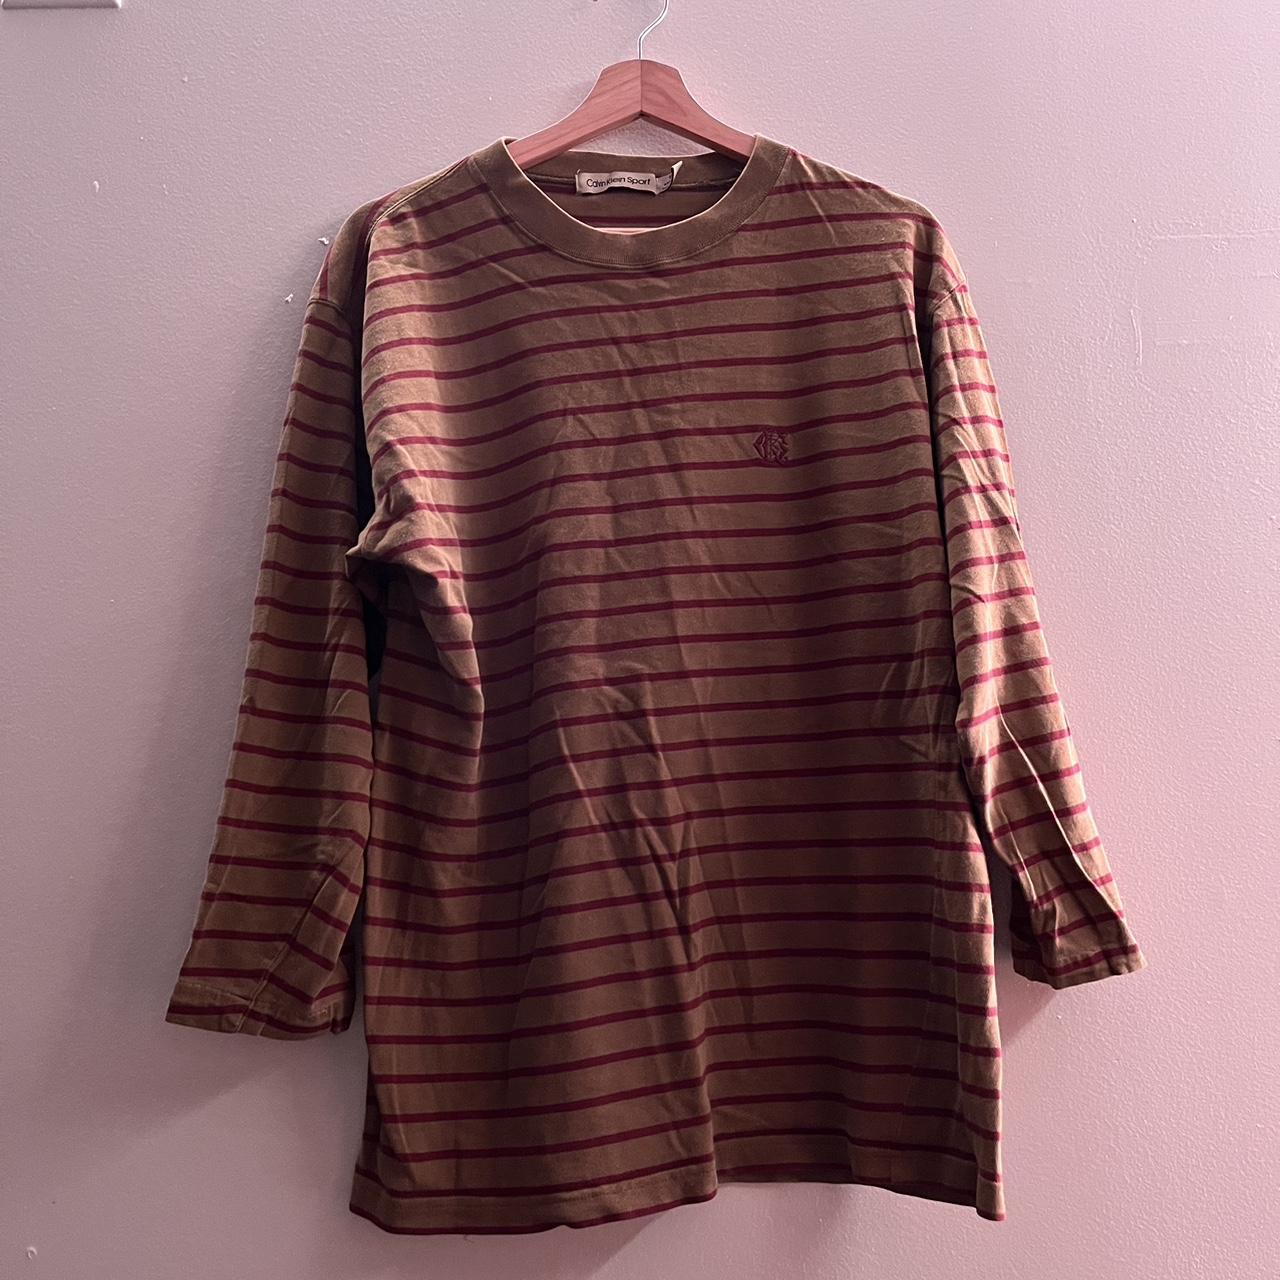 Calvin Klein Sport Depop like brown... size\'s a - M, fit but